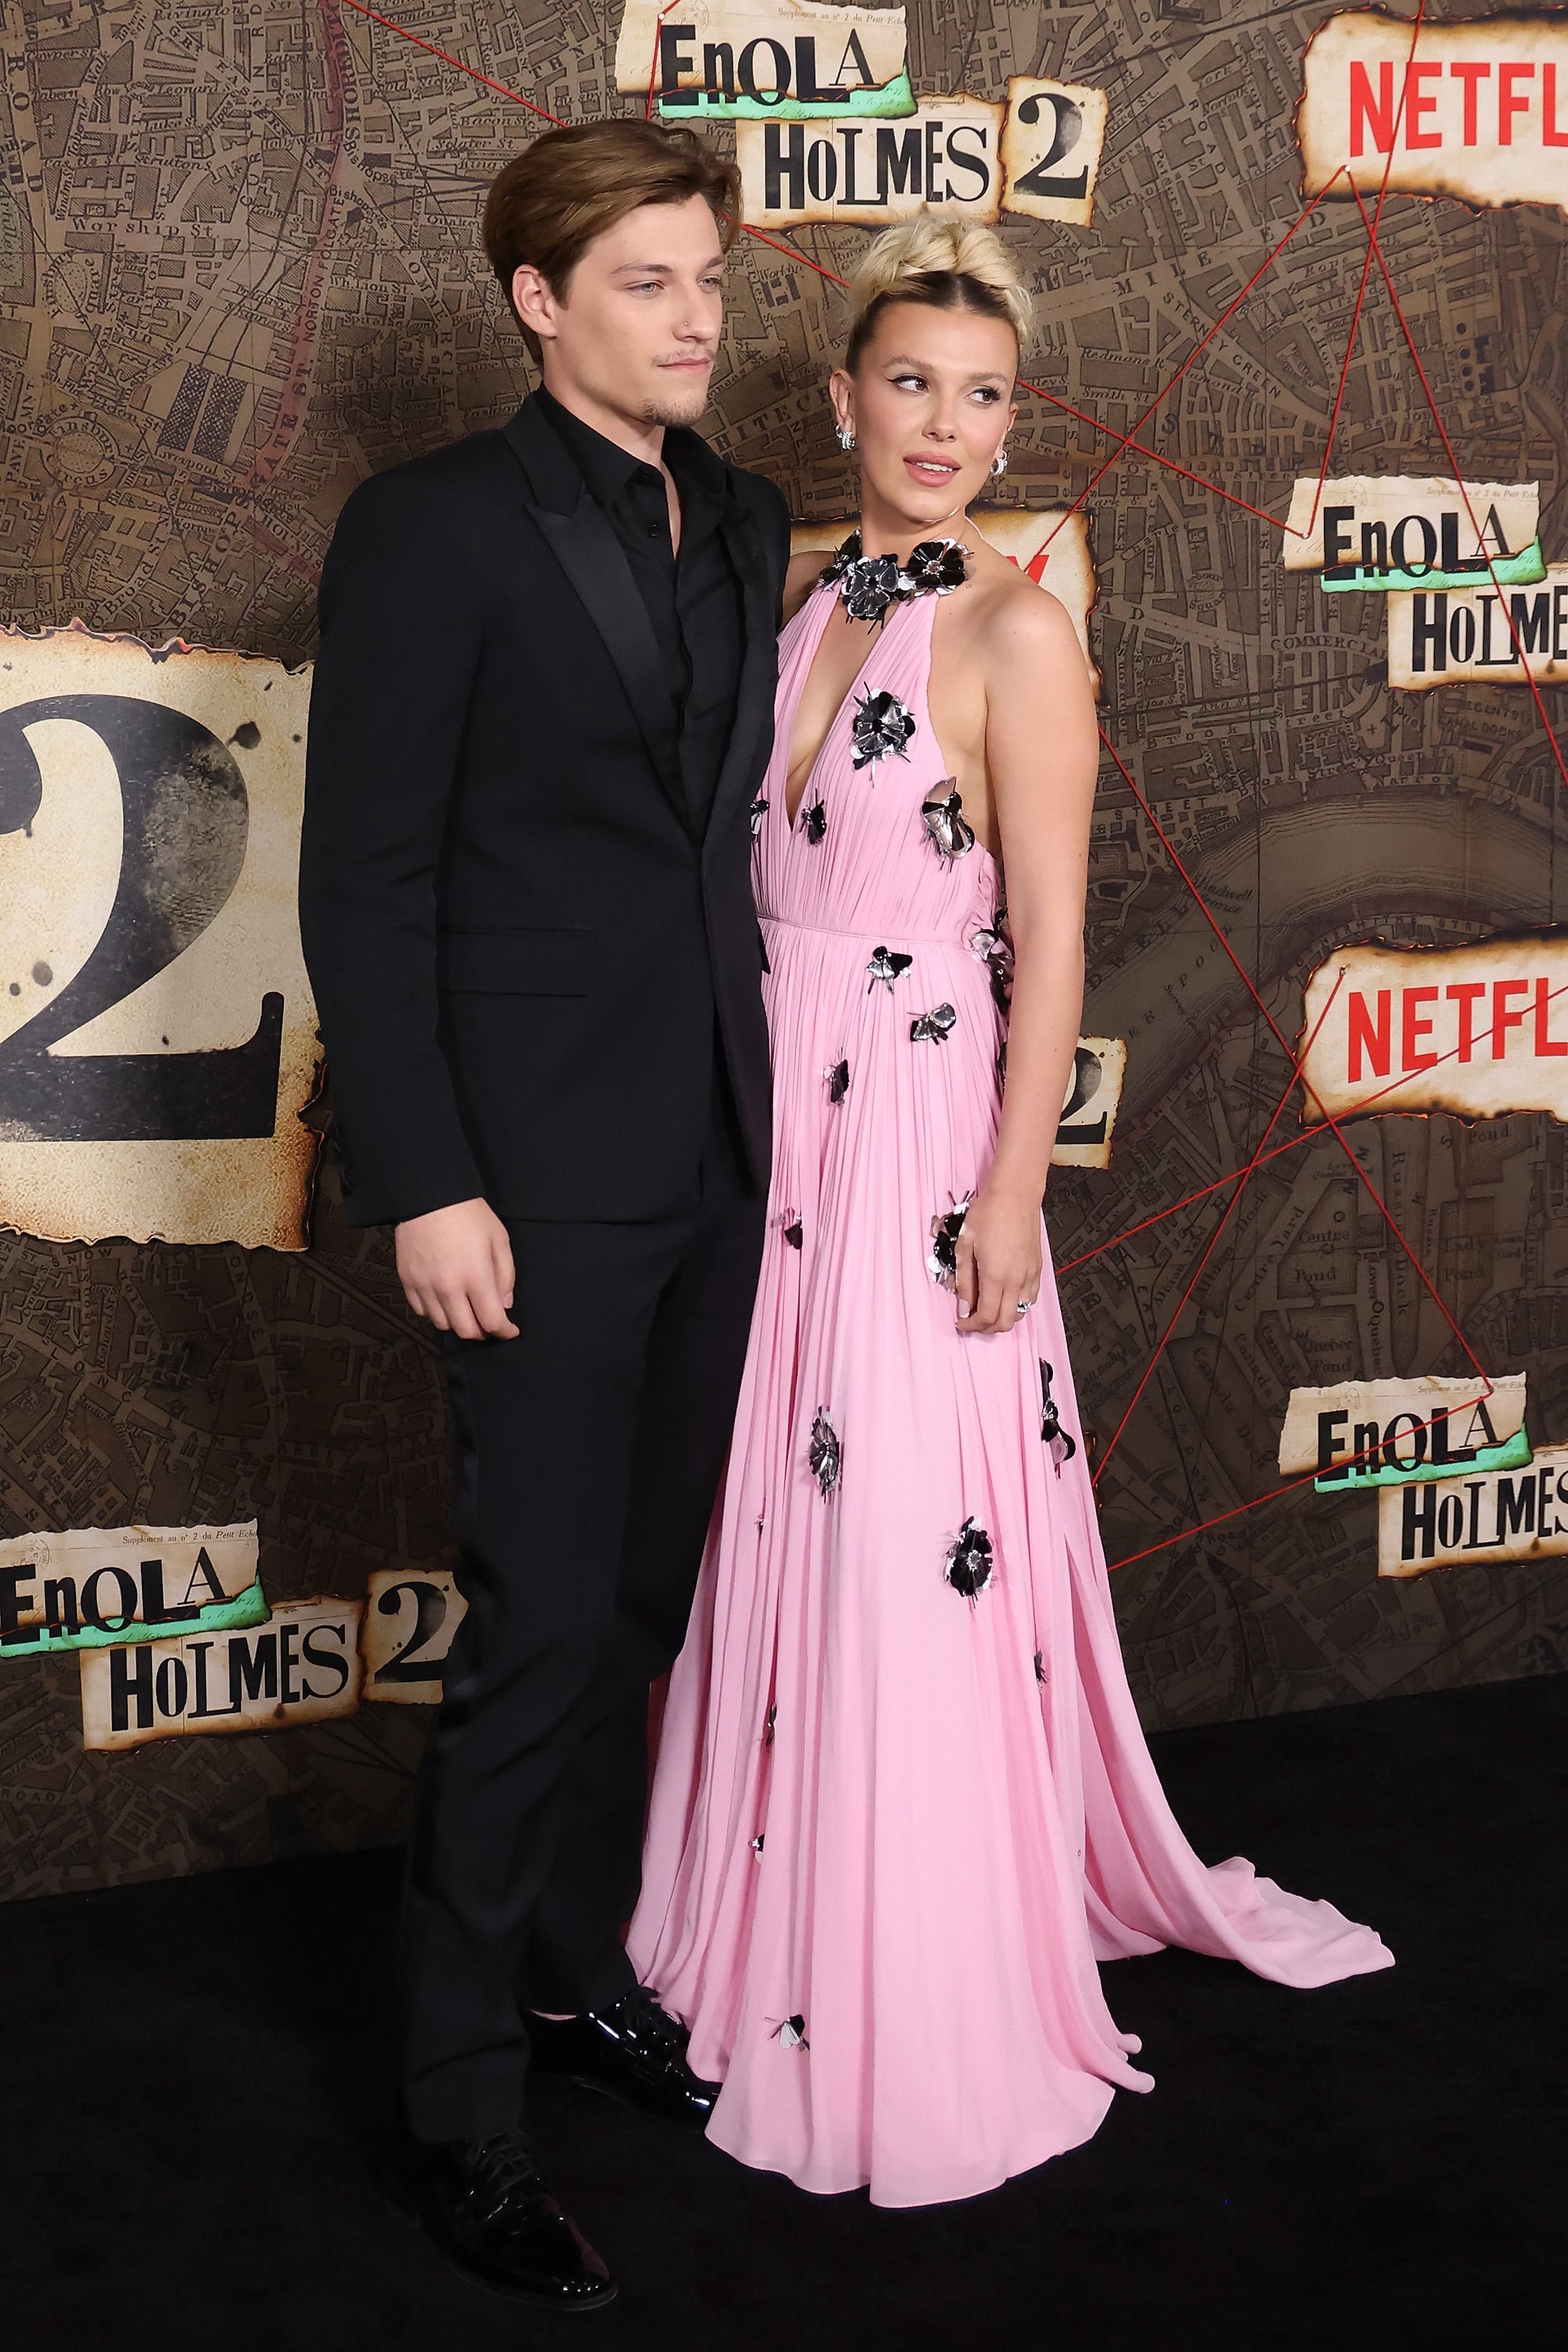 Millie Bobby Brown is joined by beau Jake Bongiovi at premiere for  Netflix's Enola Holmes 2 in NYC